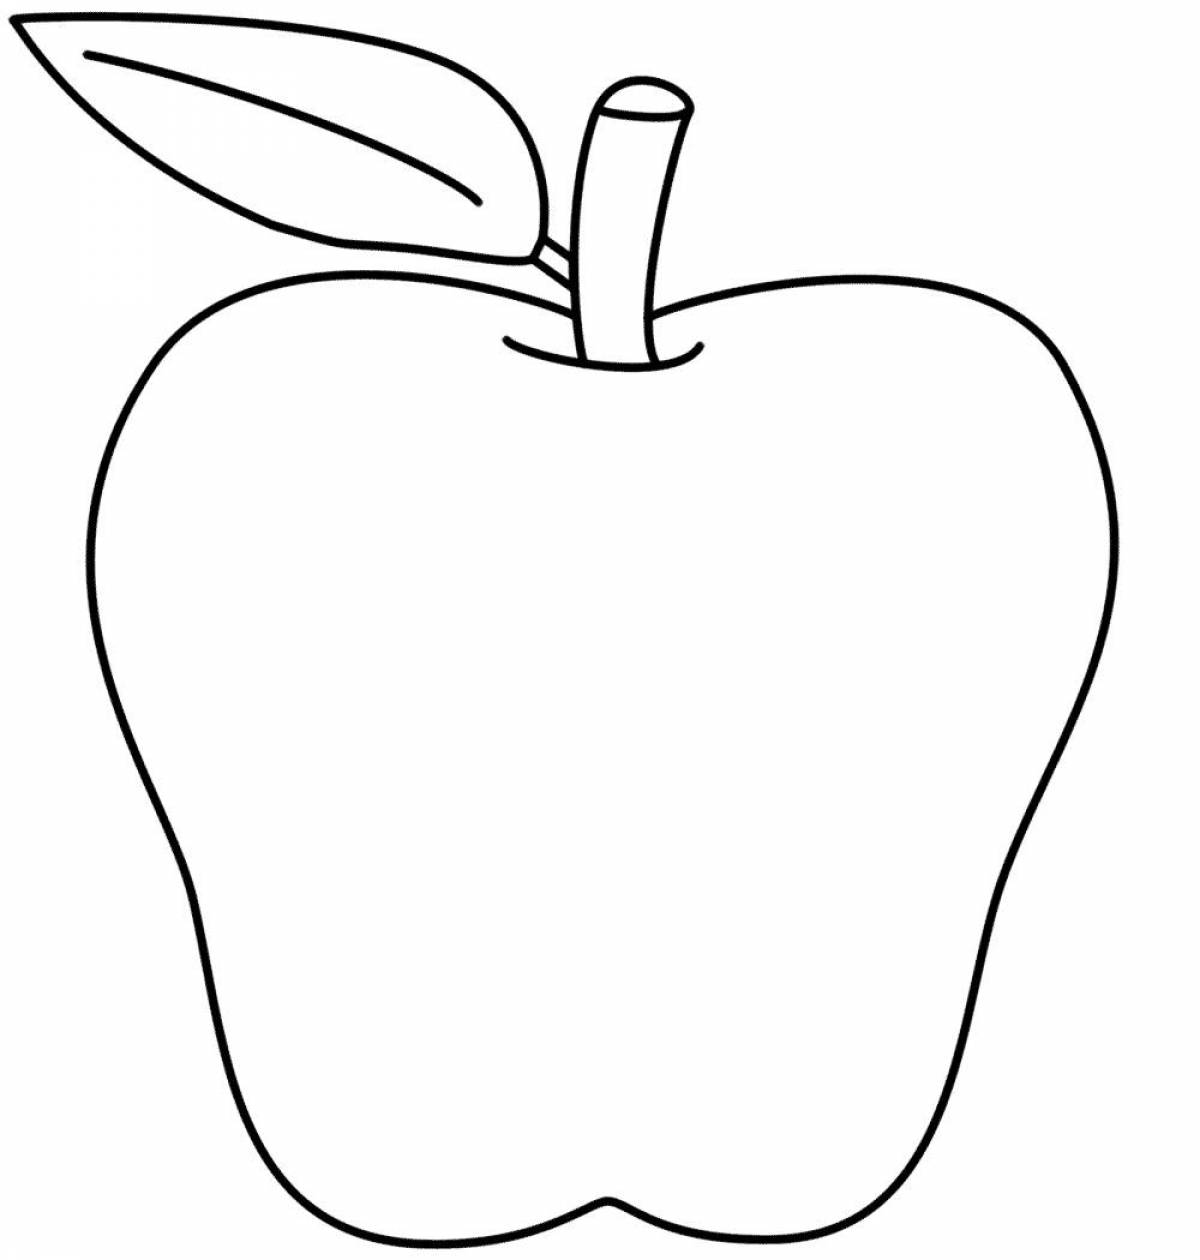 Color-lovely apple coloring page for kids